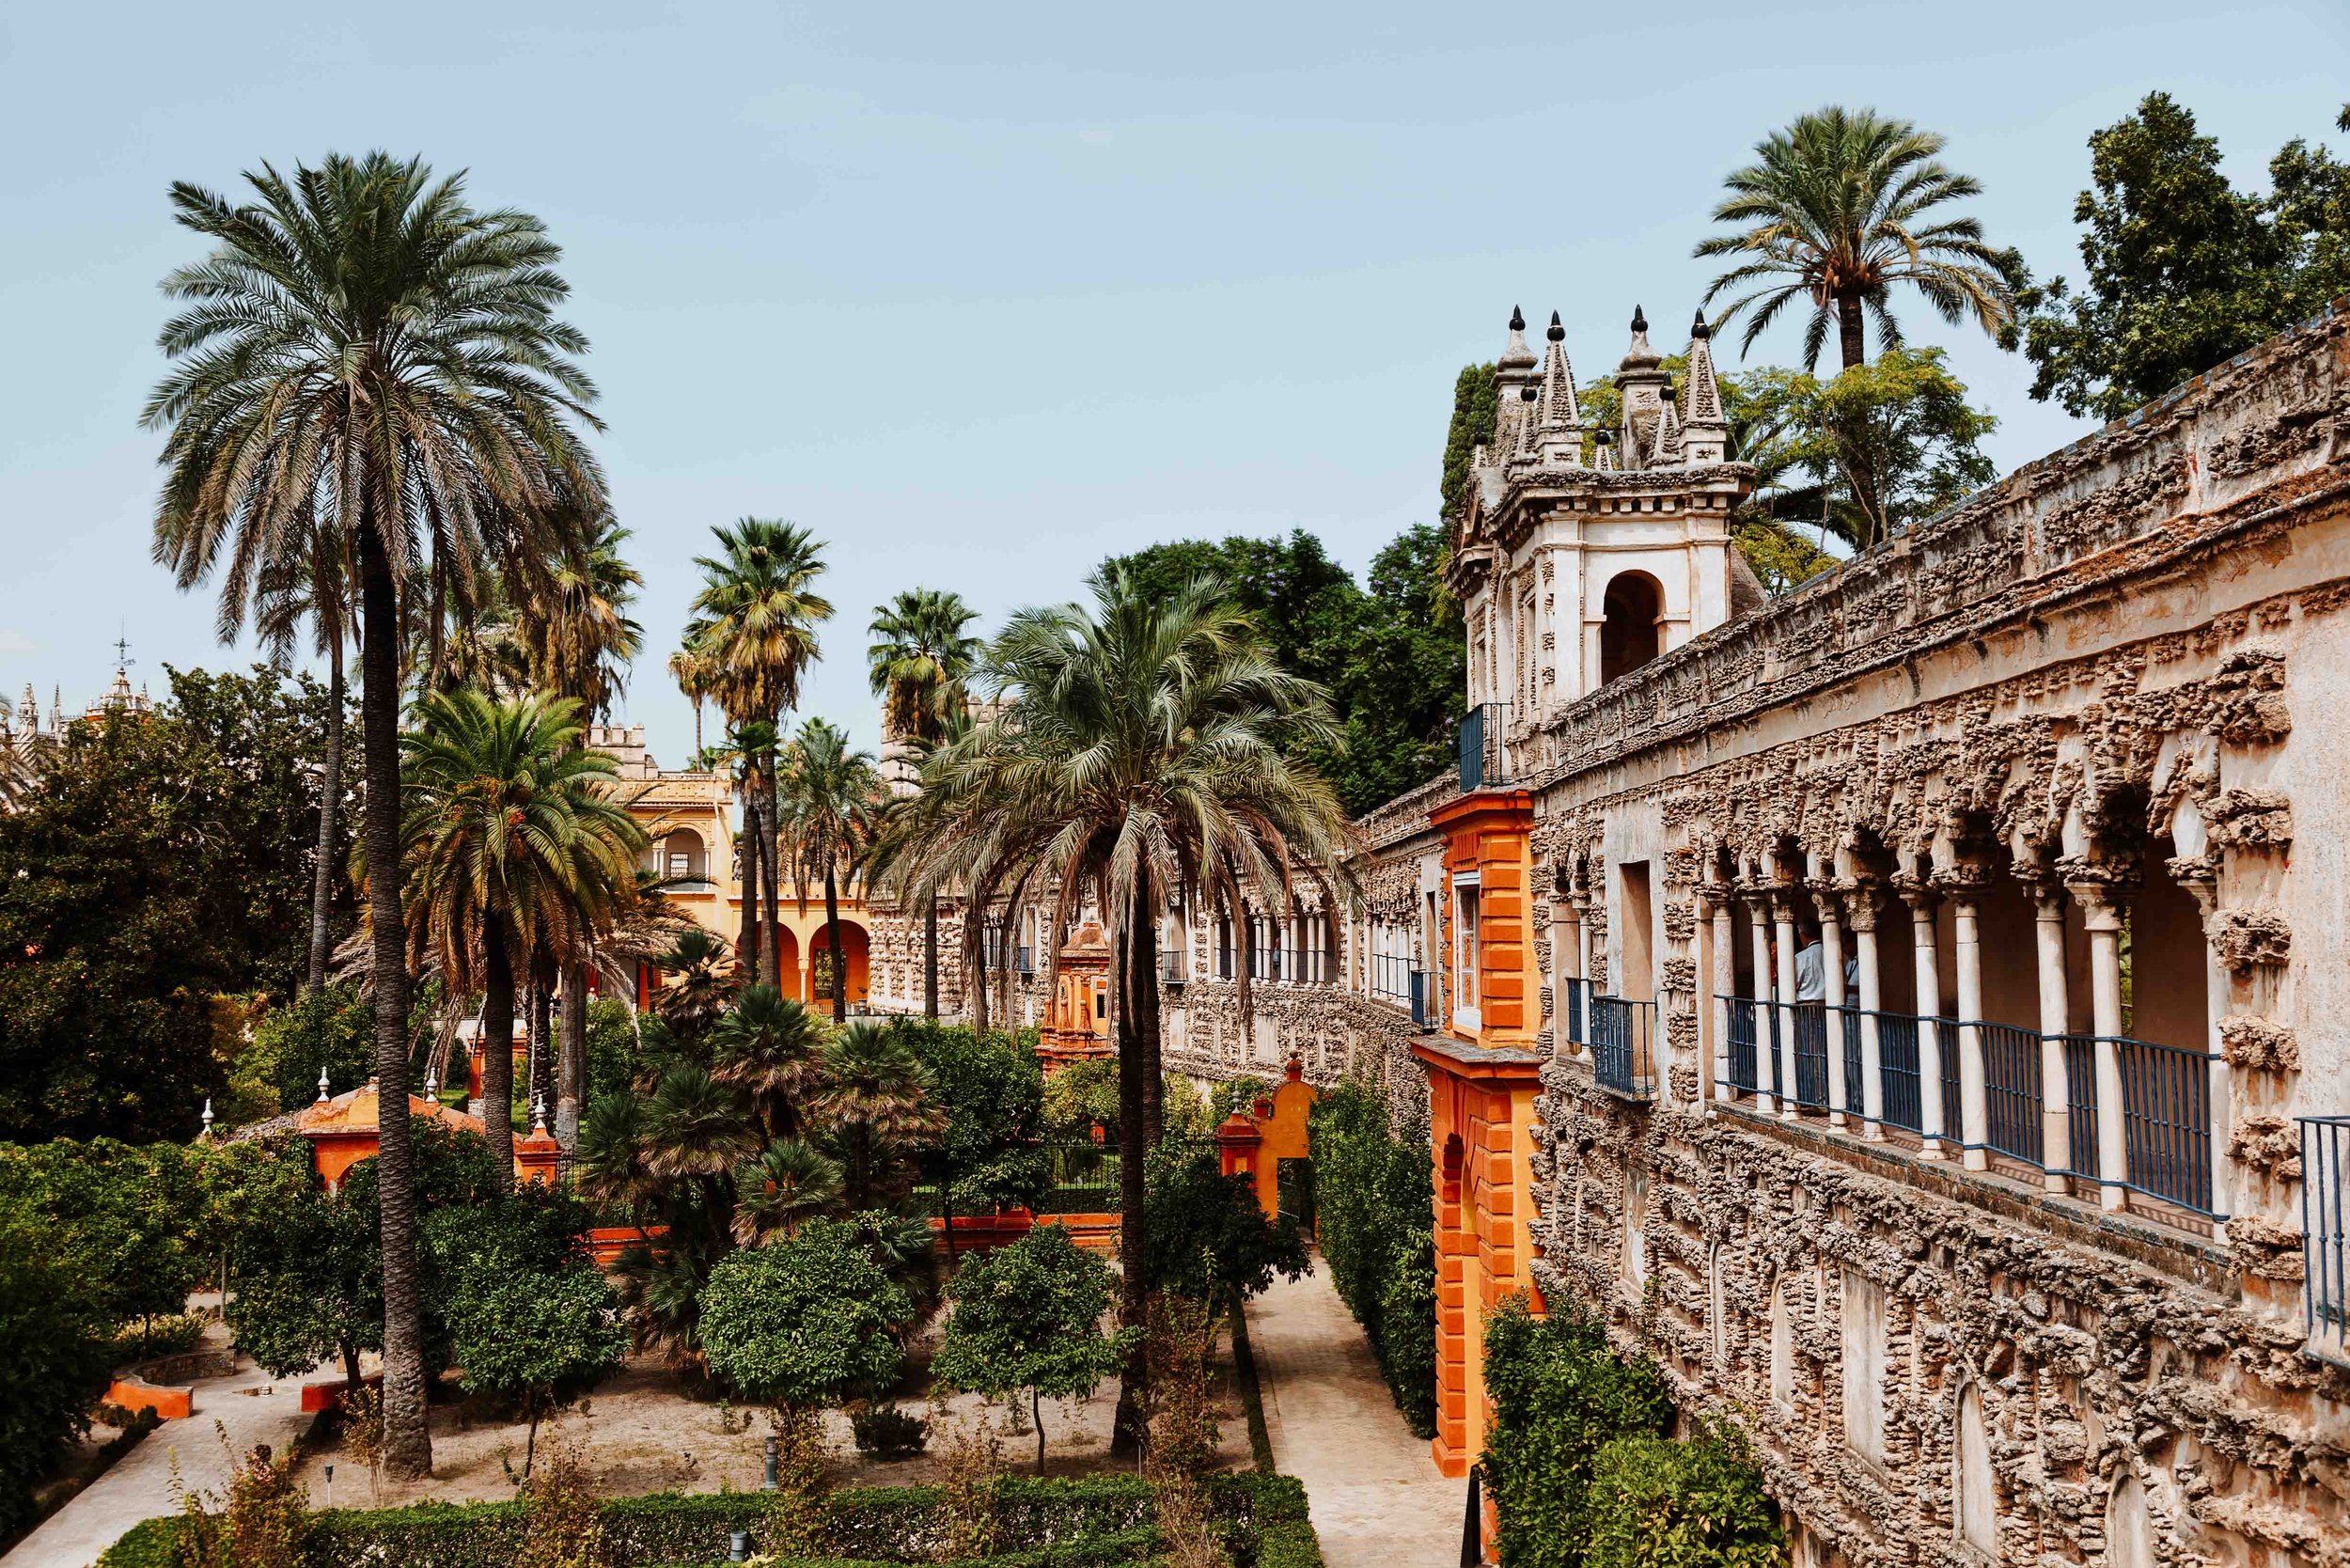 Game of Thrones Seville locations real alcazar seville game of thrones